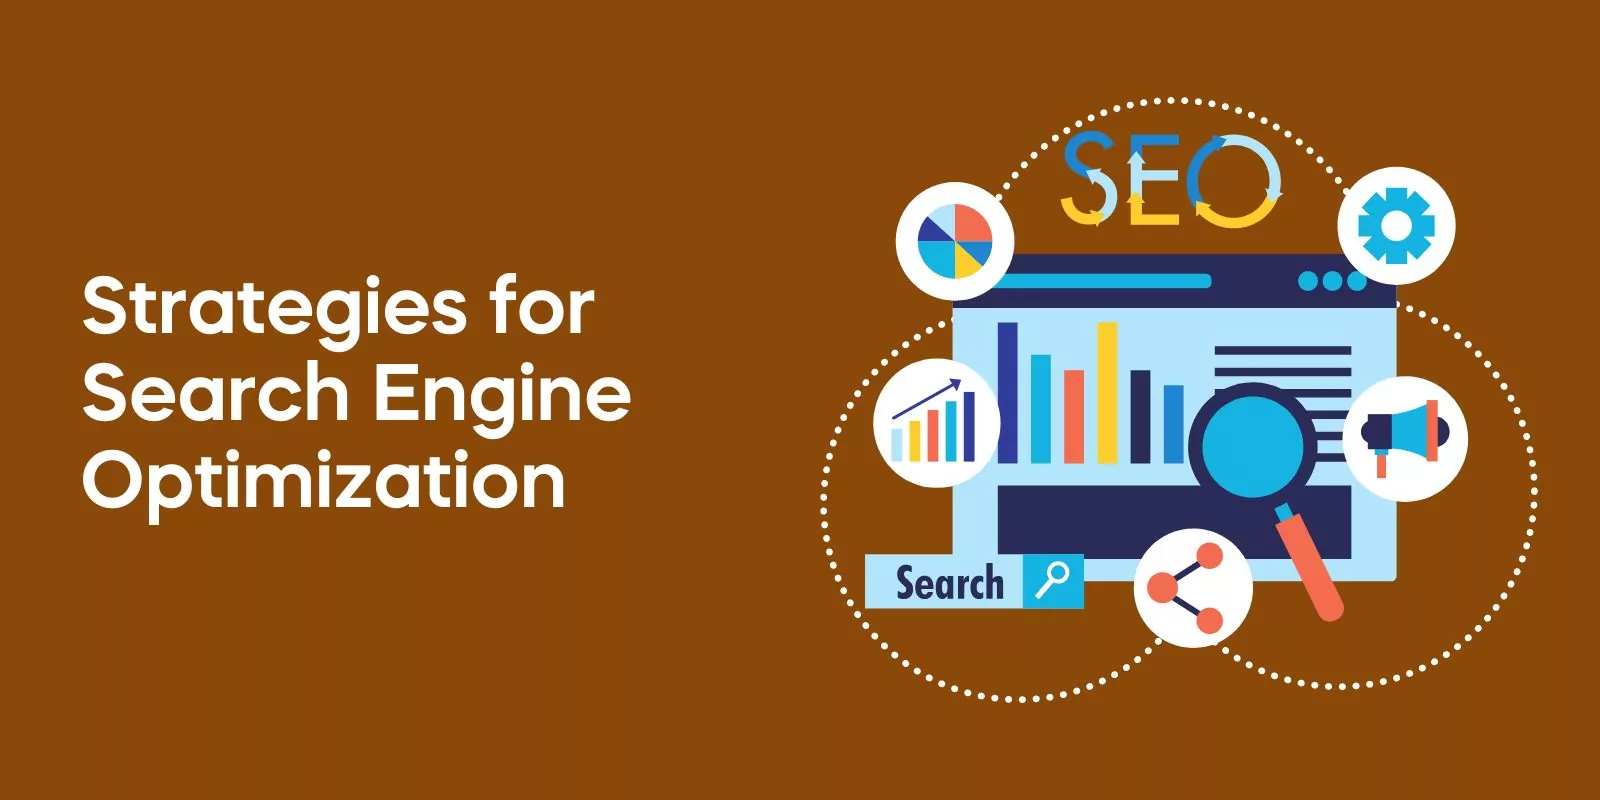 Strategies for Search Engine Optimization